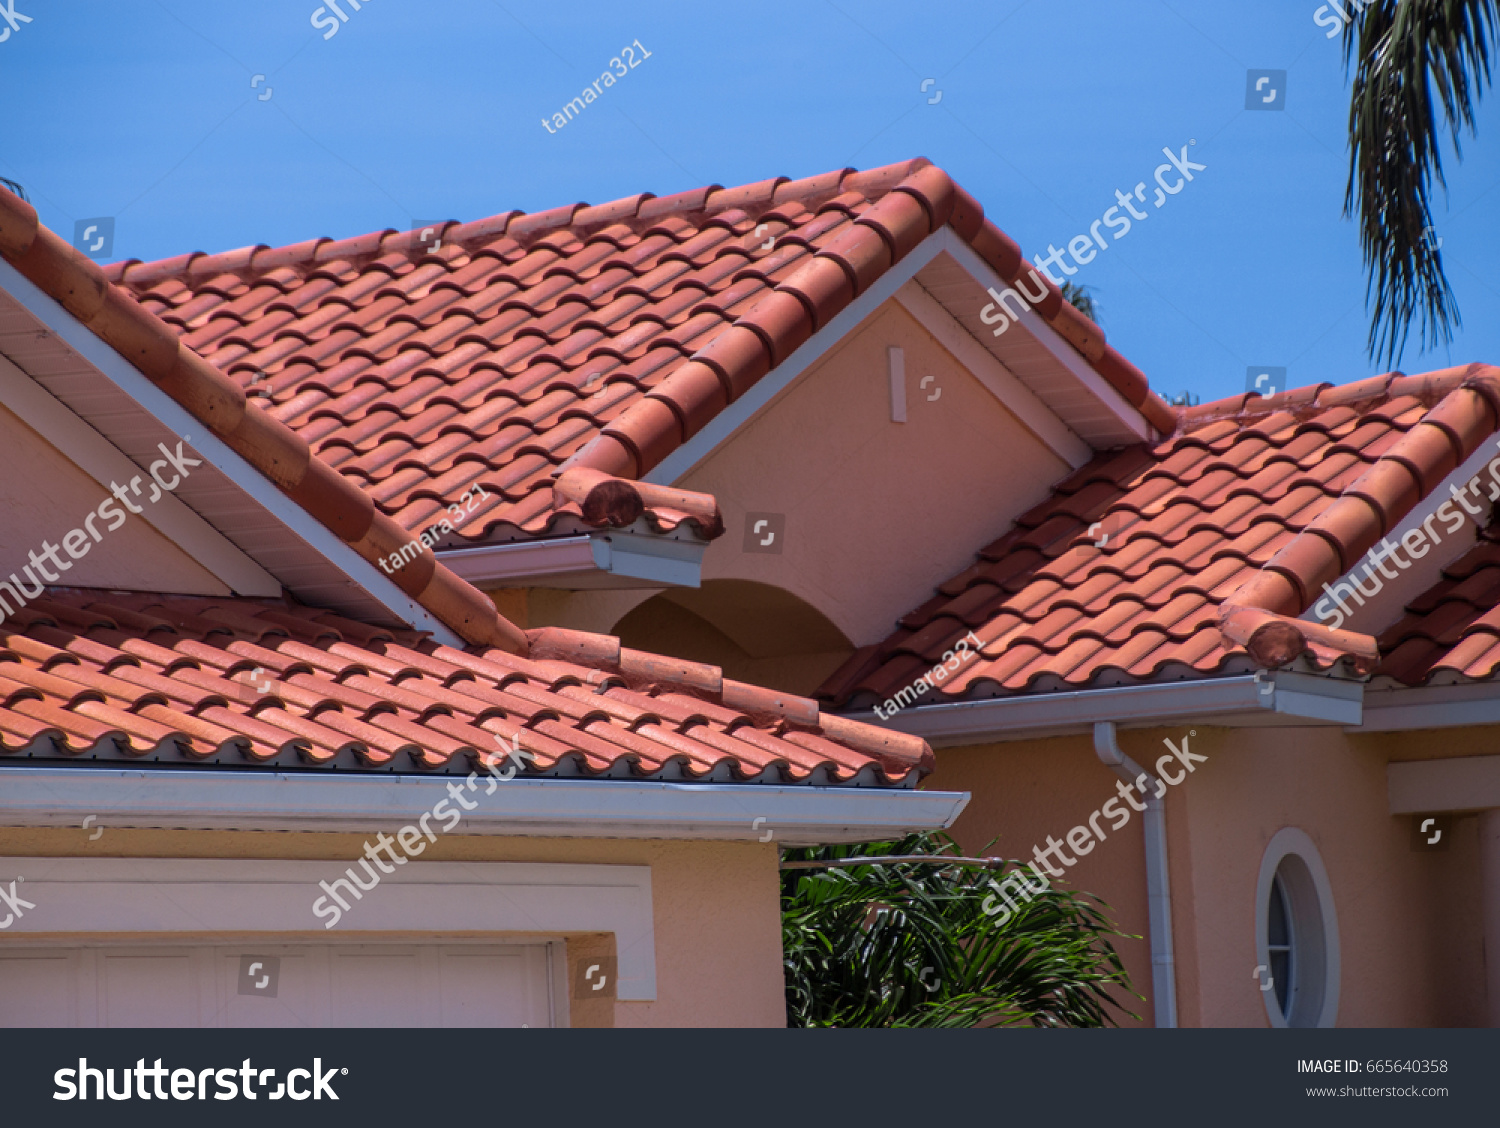 Florida home with spanish tiled roof #665640358